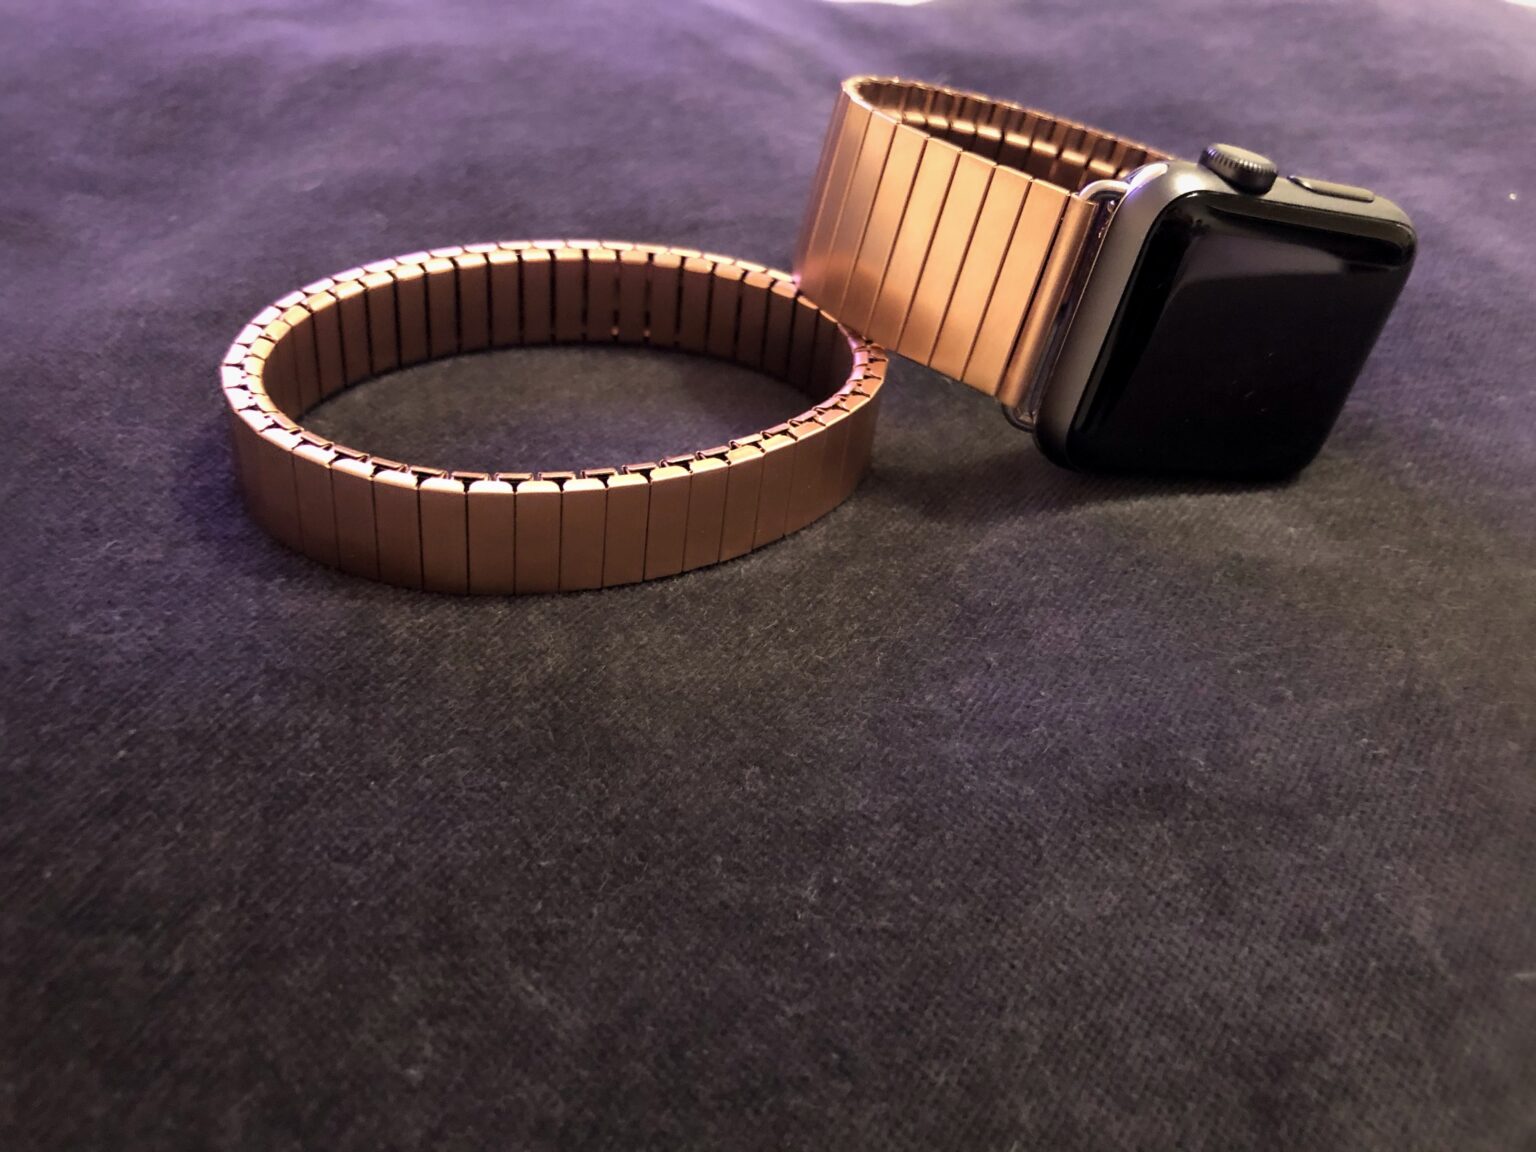 Get Riley & Lo metal Apple Watch bands and stacking bracelets at 25% off.